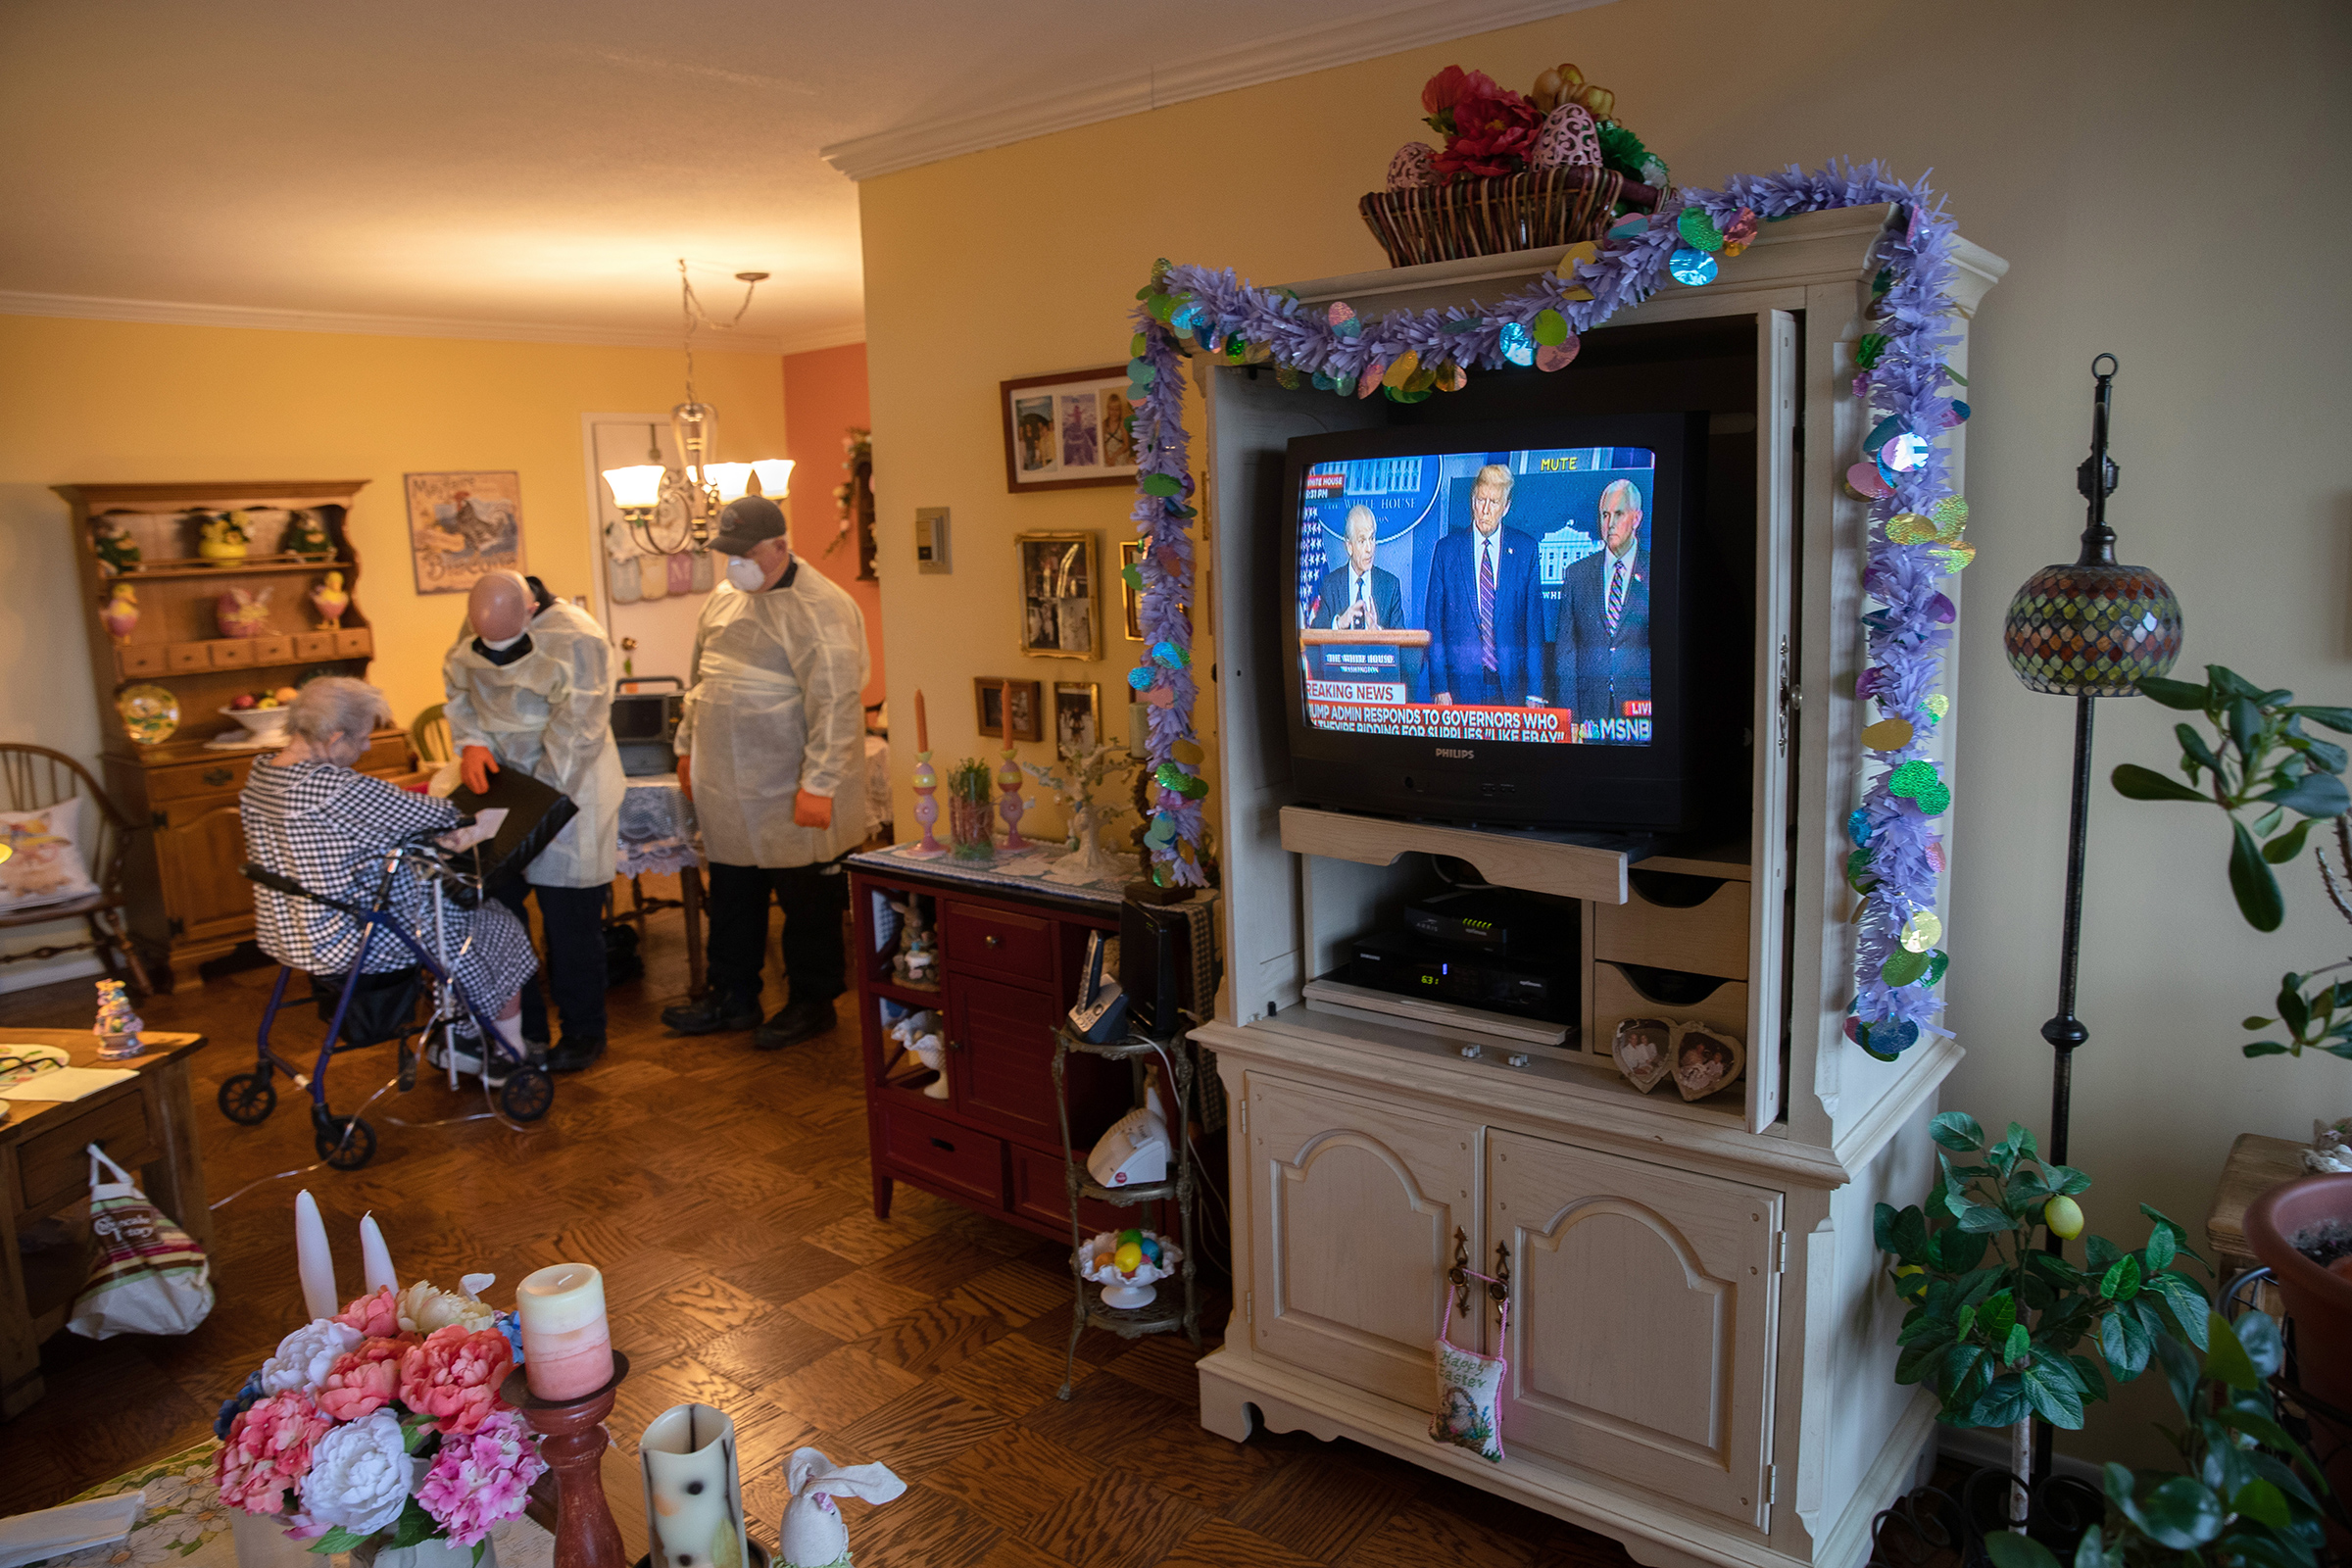 EMS medics wearing personal protective equipment check a woman in her apartment for COVID-19 symptoms during a televised Presidential press conference on April 02 in Stamford, Connecticut. (John Moore—Getty Images)